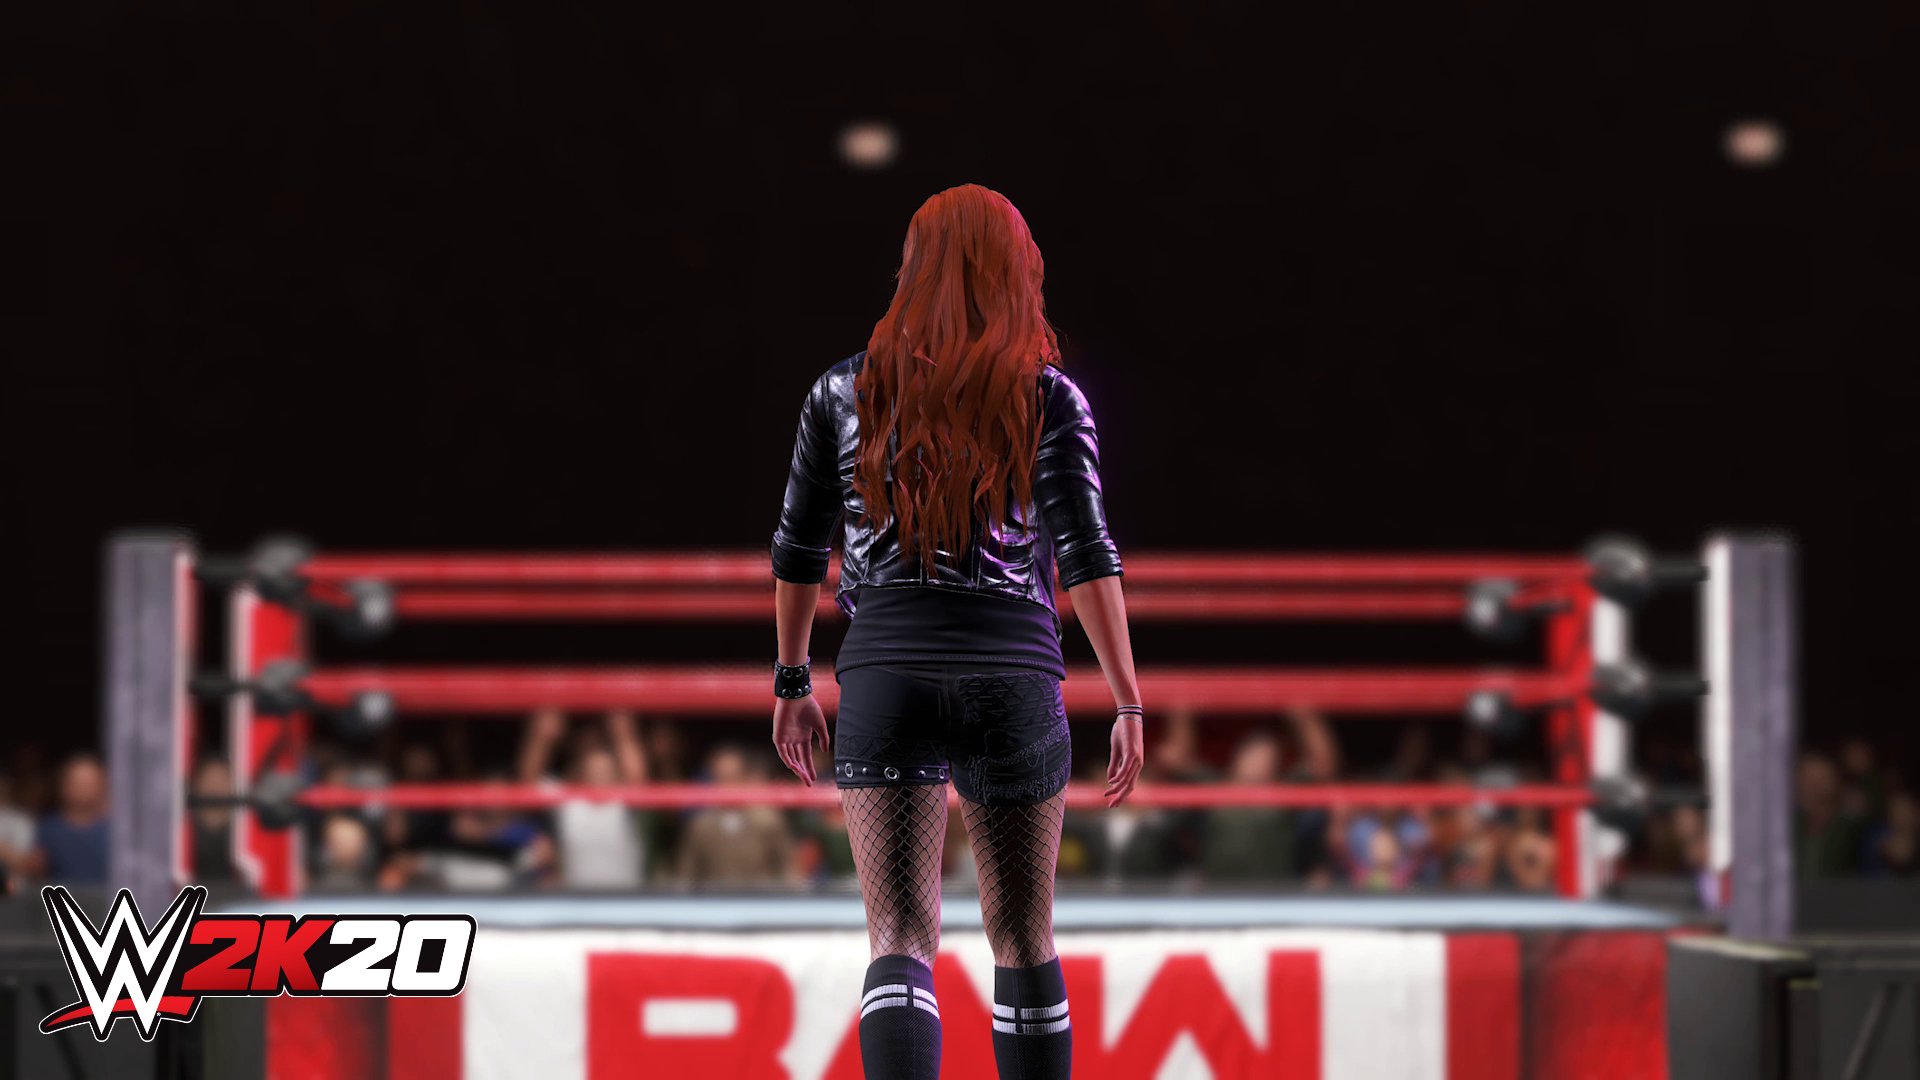 Finally the WWE 2K20 changes bring female superstars in career mode